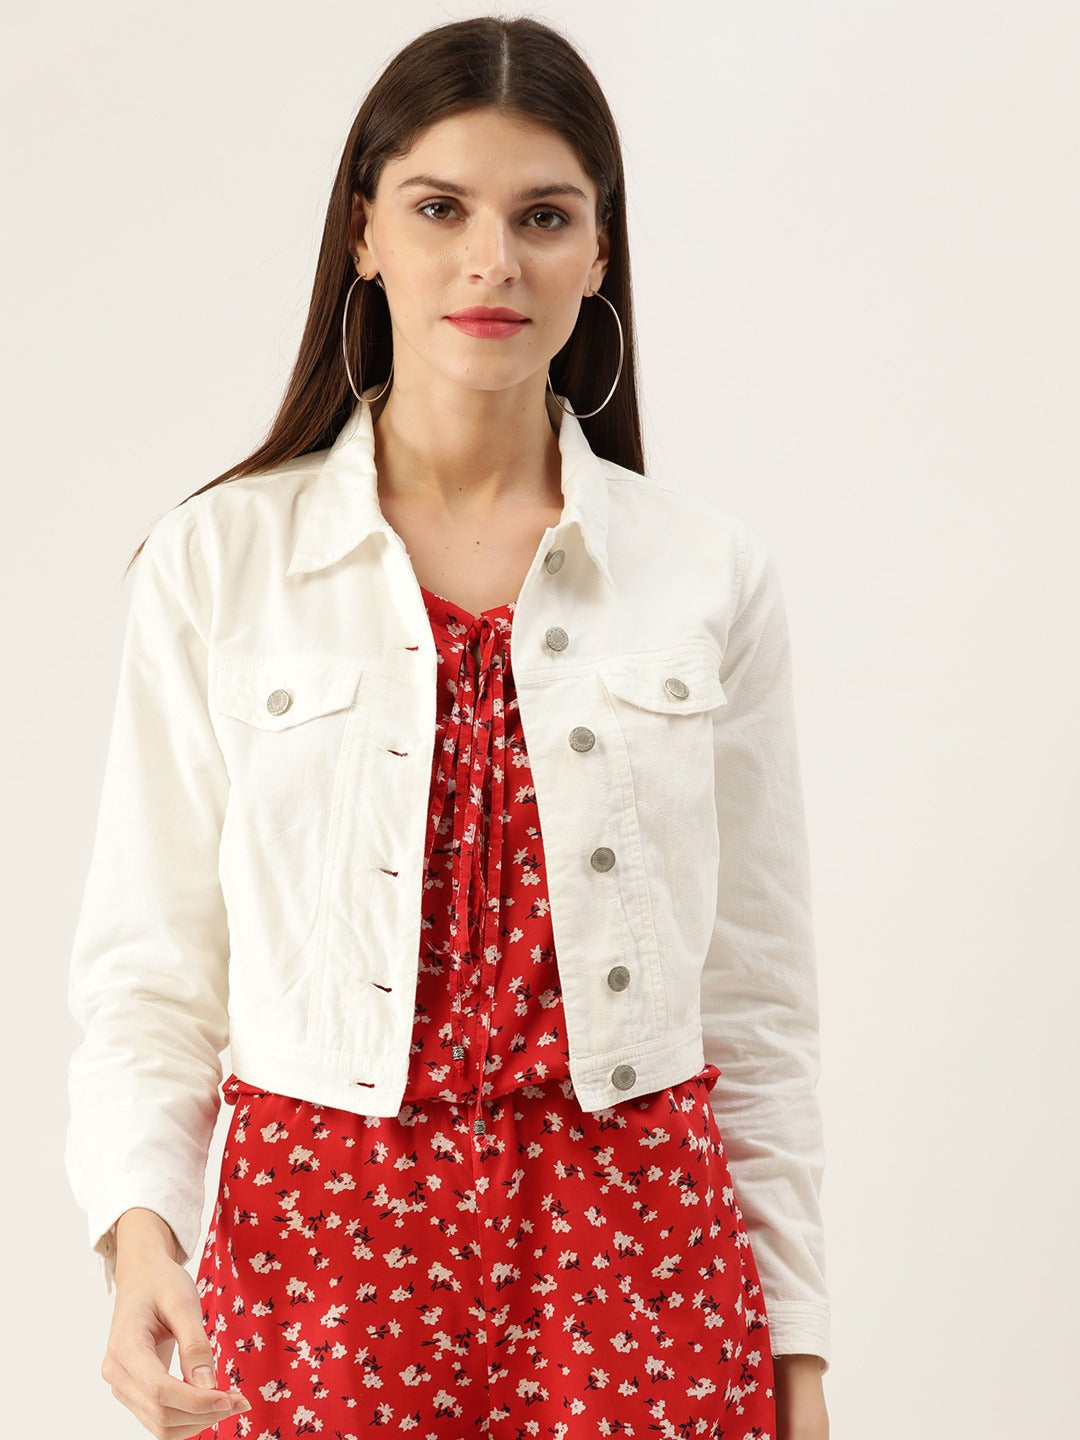 White Women's Denim Crop Jacket - Stylish outerwear with front button closure, slim silhouette, and white color.